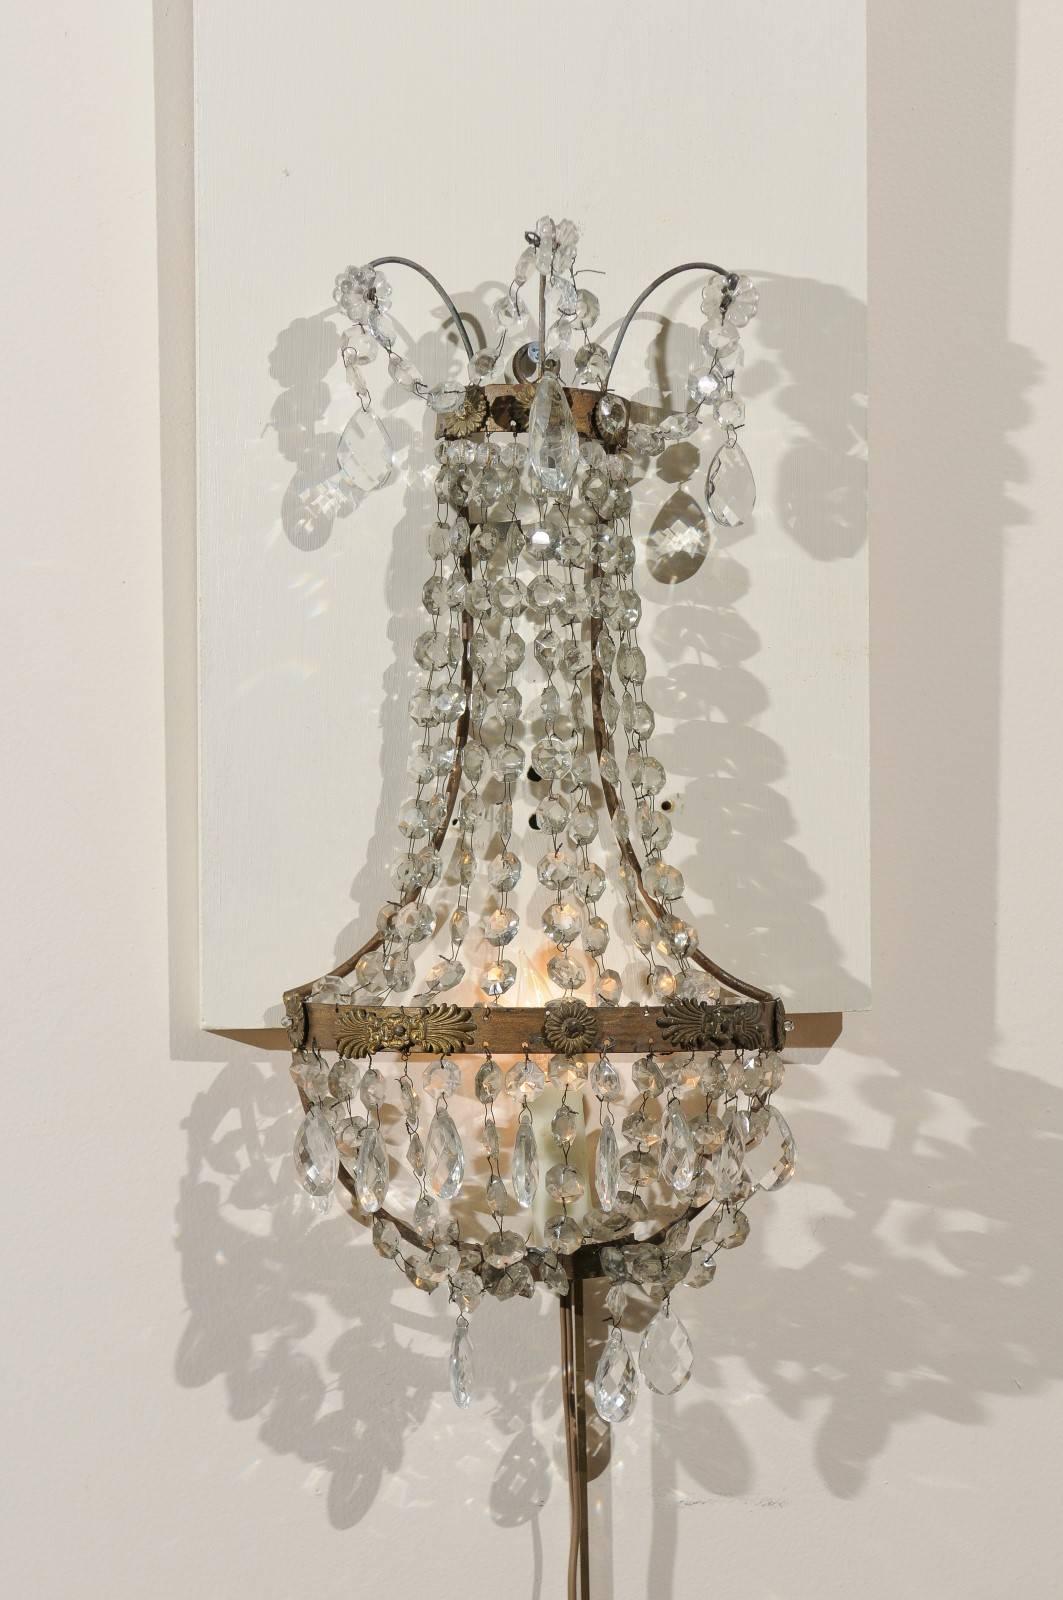 Pair of 20th century Italian crystal beaded basket sconces with one (1) light.